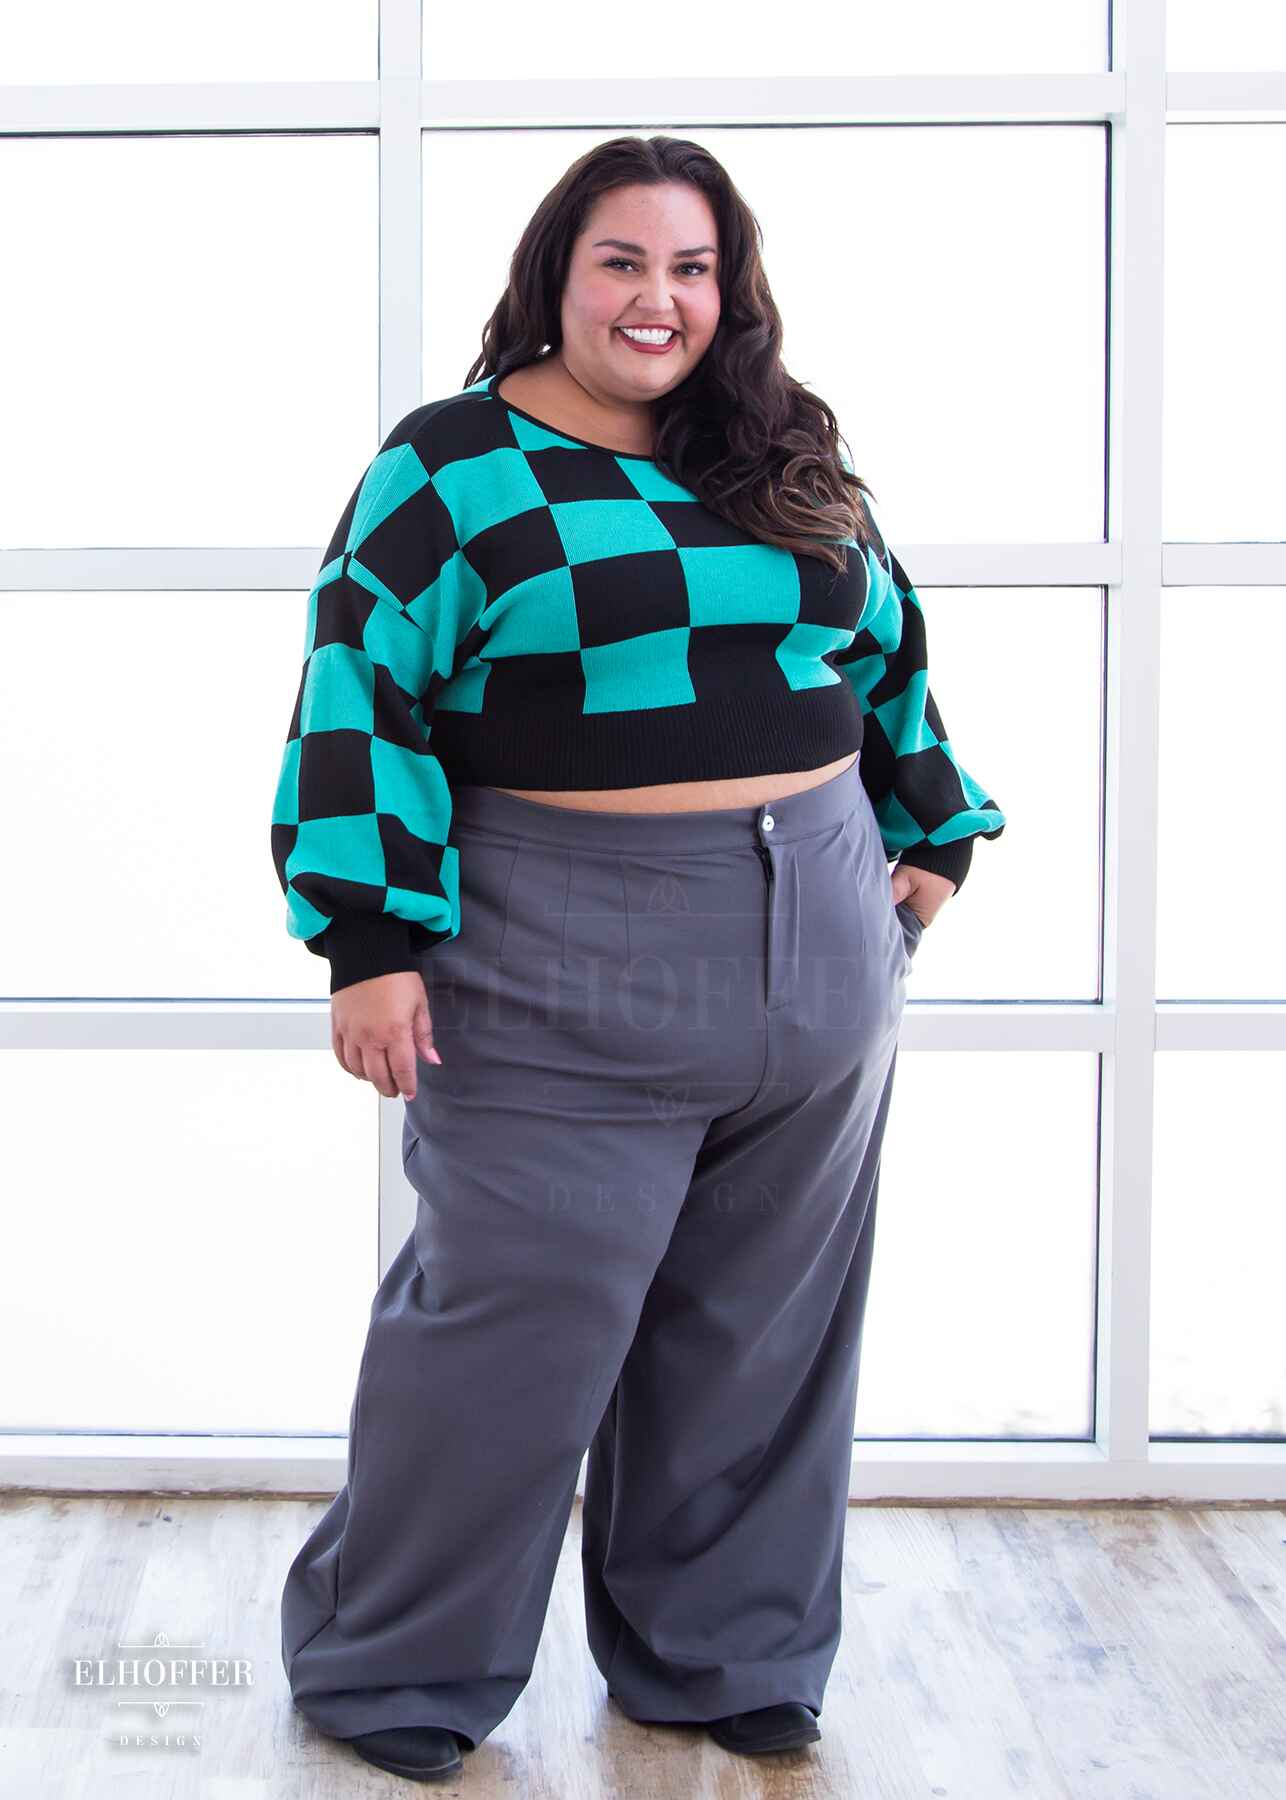 Kristen, a sun kissed skin 3XL model with long dark brown hair, is smiling while wearing a cropped oversize sweater with a black and green chessboard pattern and long billowing sleeves.  She paired the sweater with medium grey wide leg slacks.